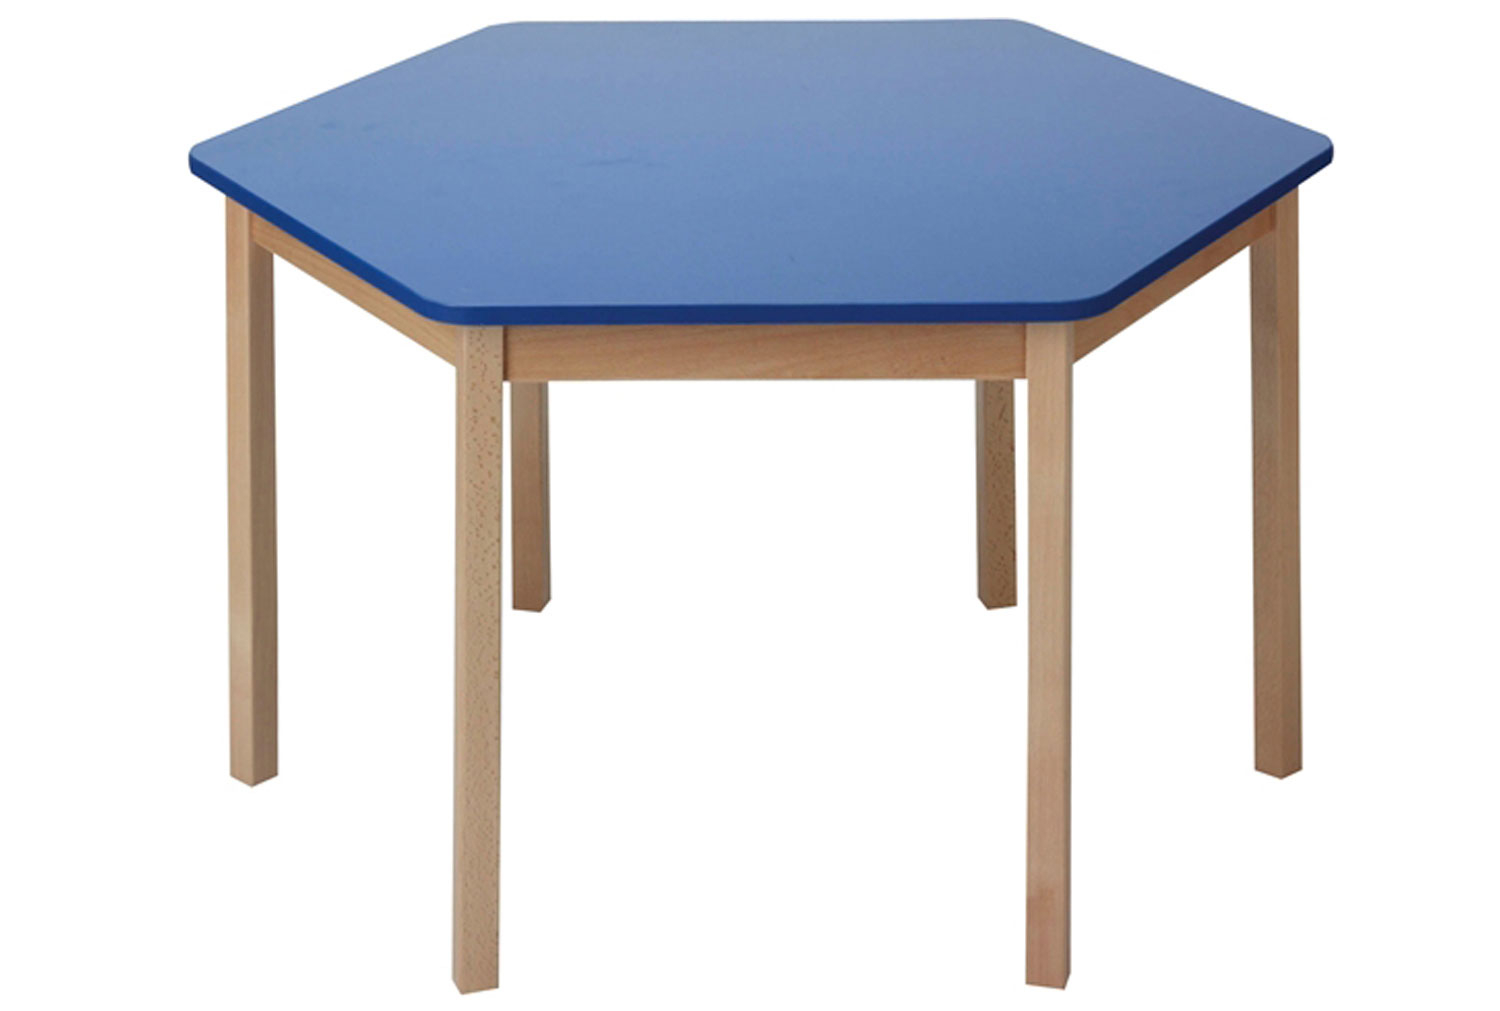 Early Years Natural Wooden Hexagonal Classroom Table, 3-5 Years - 50h (cm), Blue